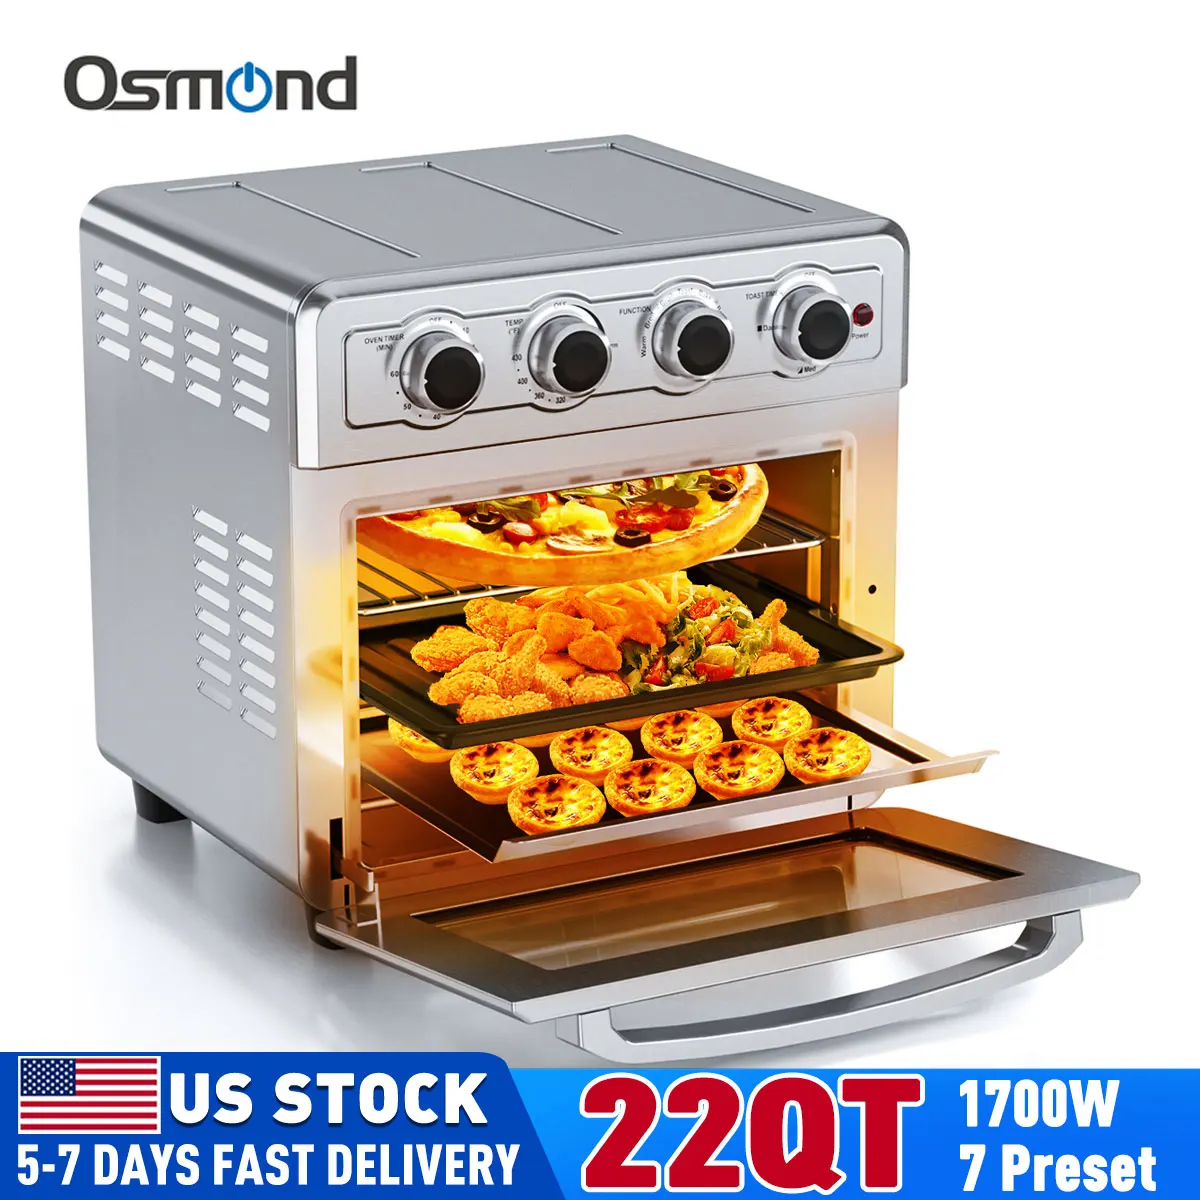 

OSMOND 21L/22QT 1700W Electric Air Fryer Oven 7 in 1 Presets menu Rotisserie Dehydrator Convection Toaster Timer Countertop Oven